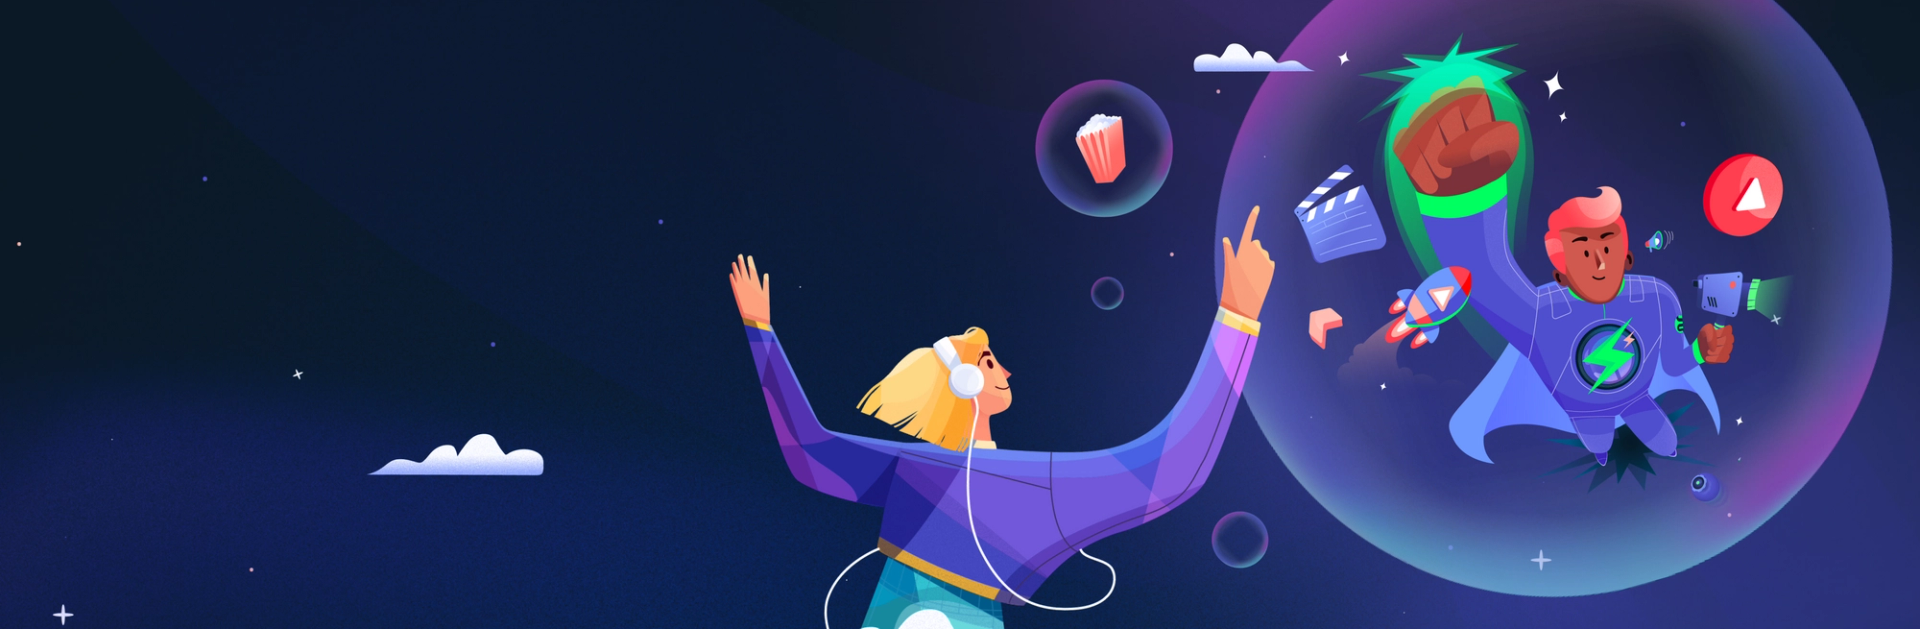 A branded illustration, relating to knowing yourself and your design partner. An illustrated character is reaching out to touch their superhero partner. 